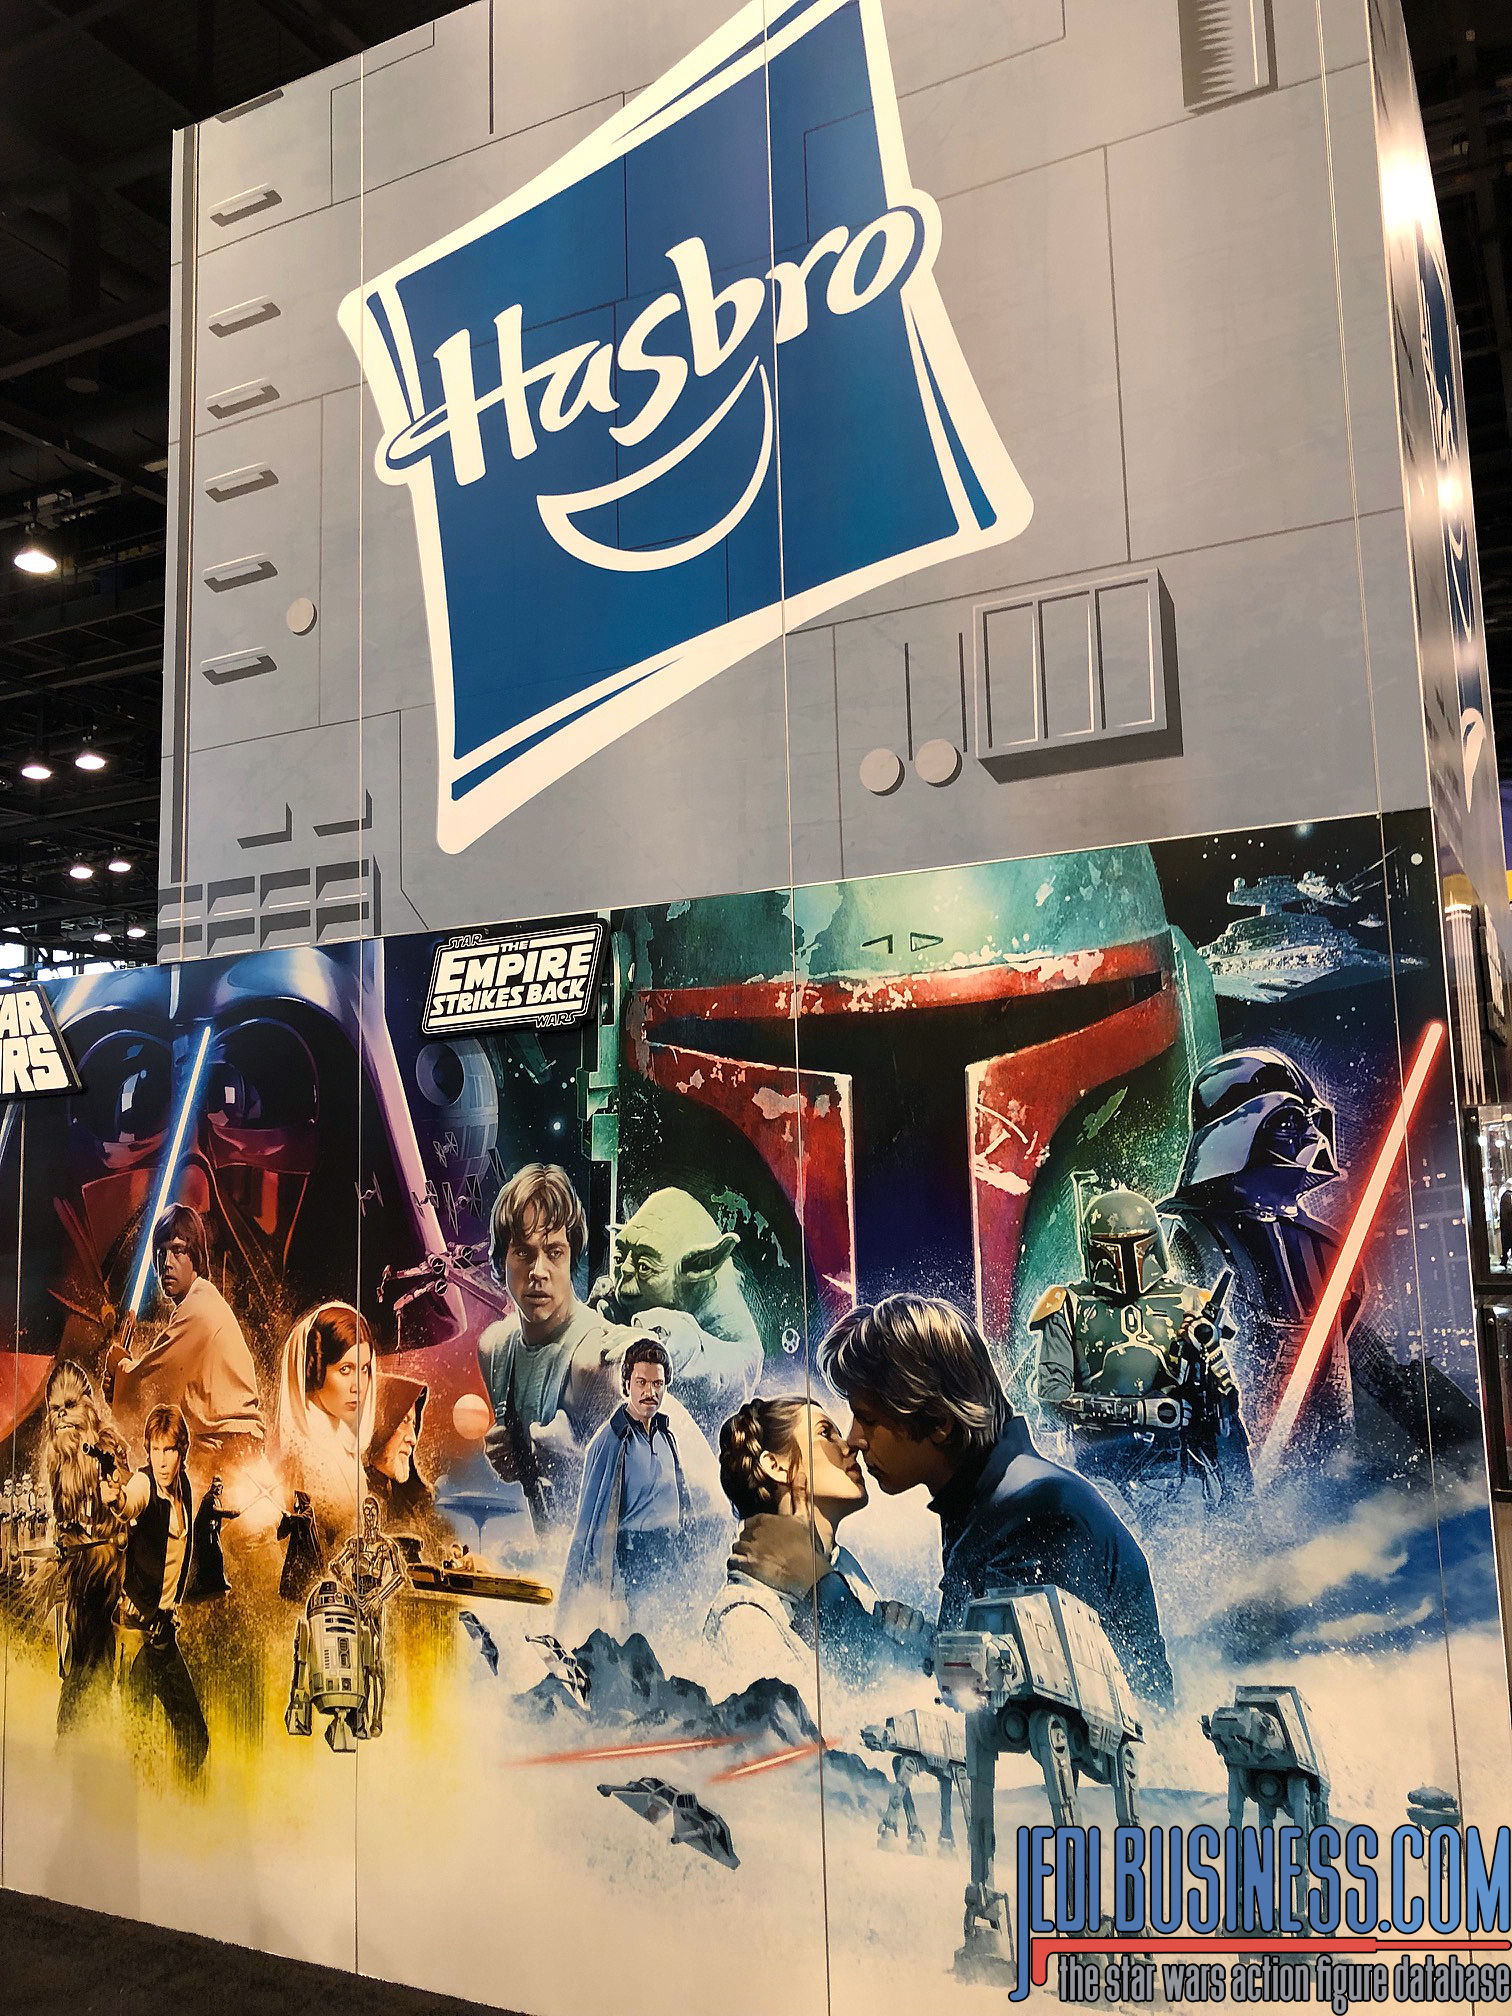 Hasbro booth at Star Wars Celebration Chicago 2019